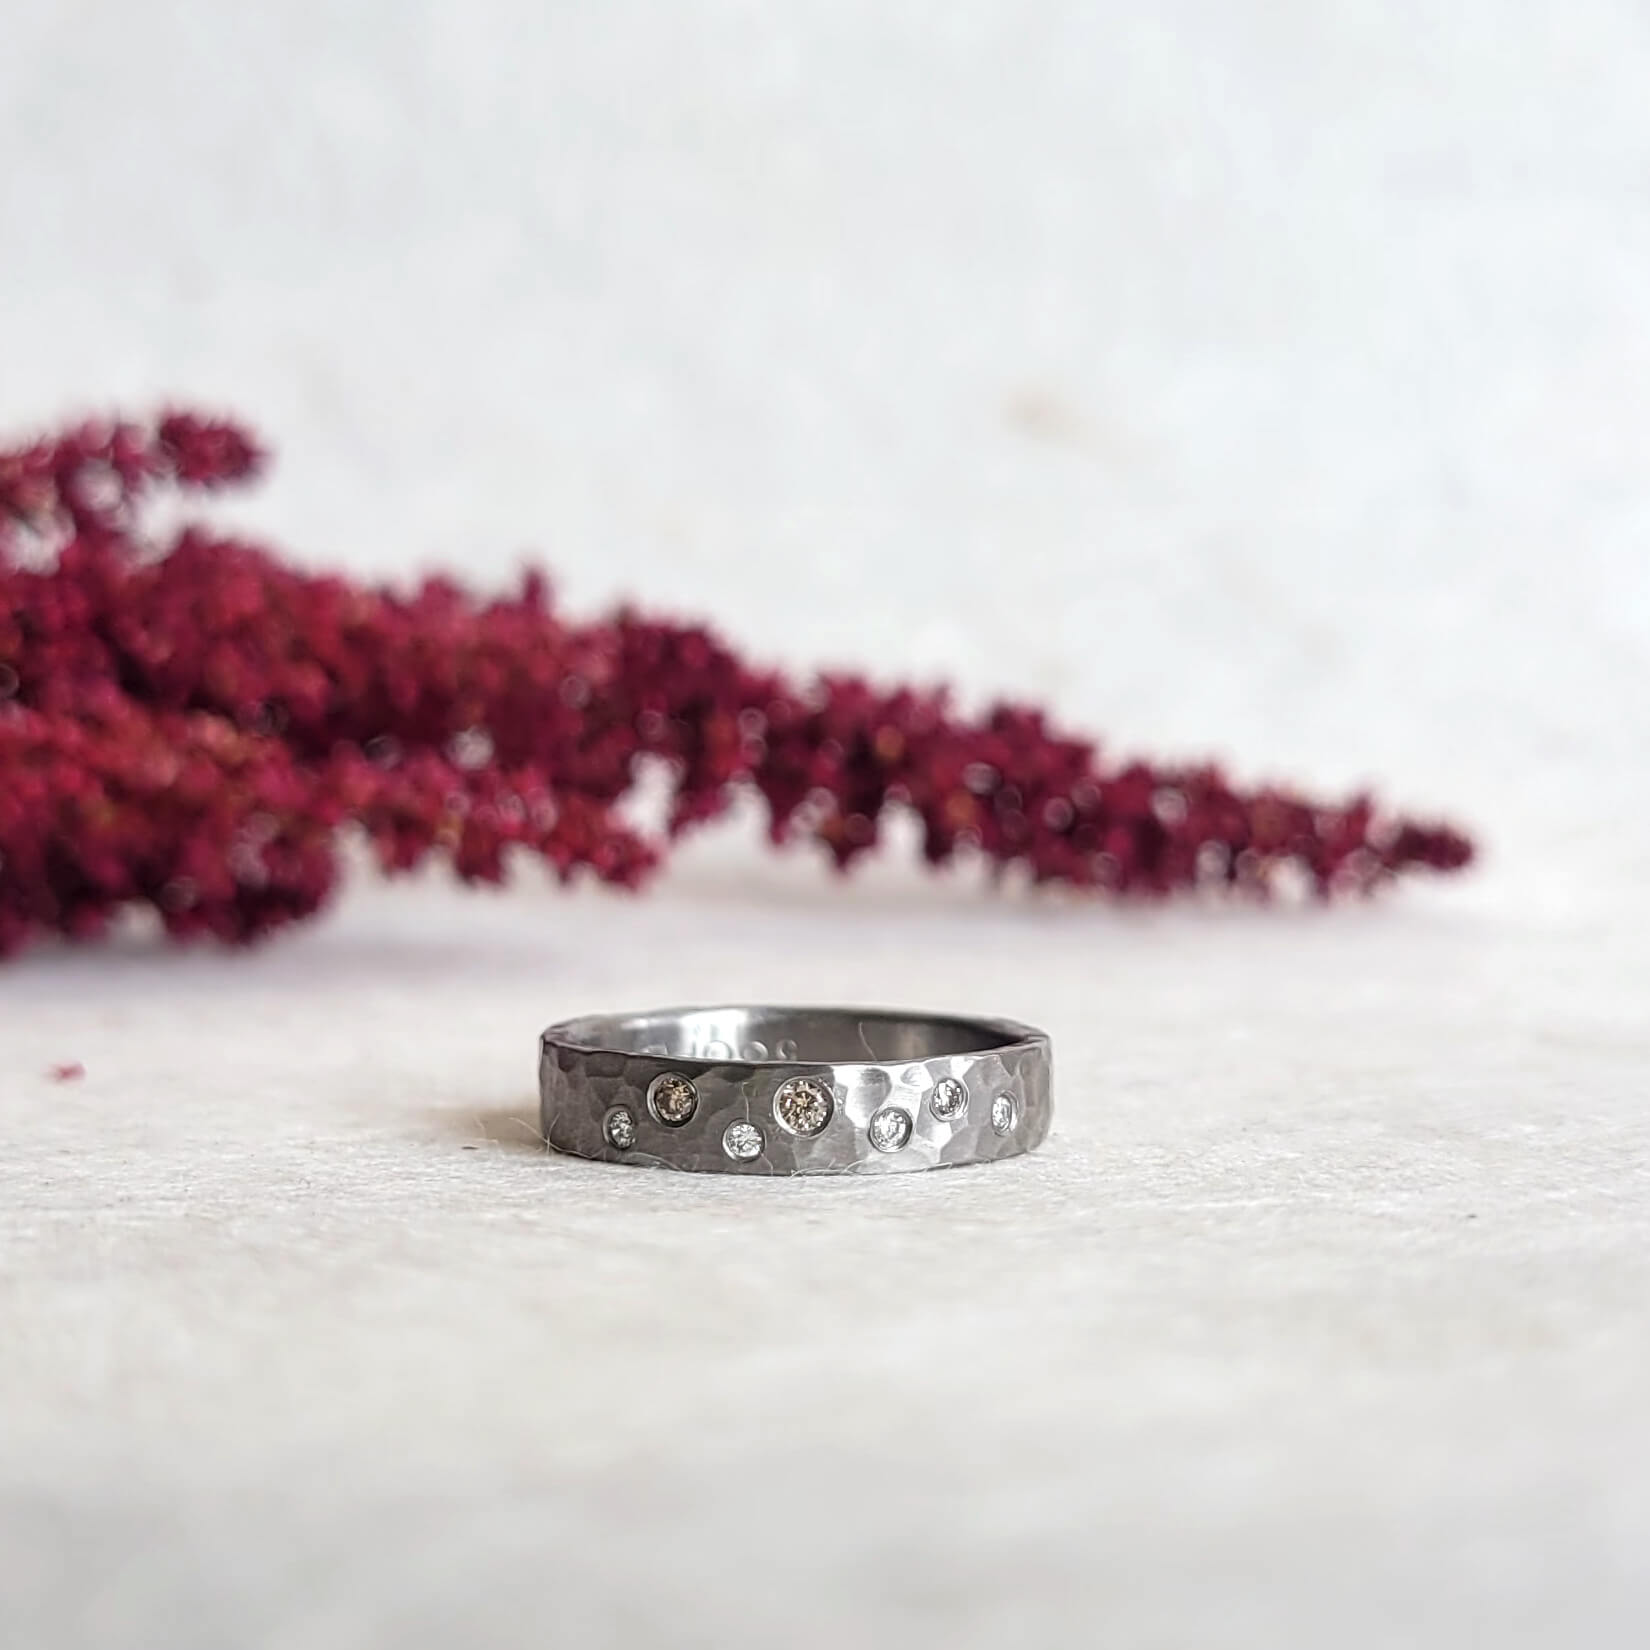 4mm Band in Hammered Palladium with Mixed Diamonds